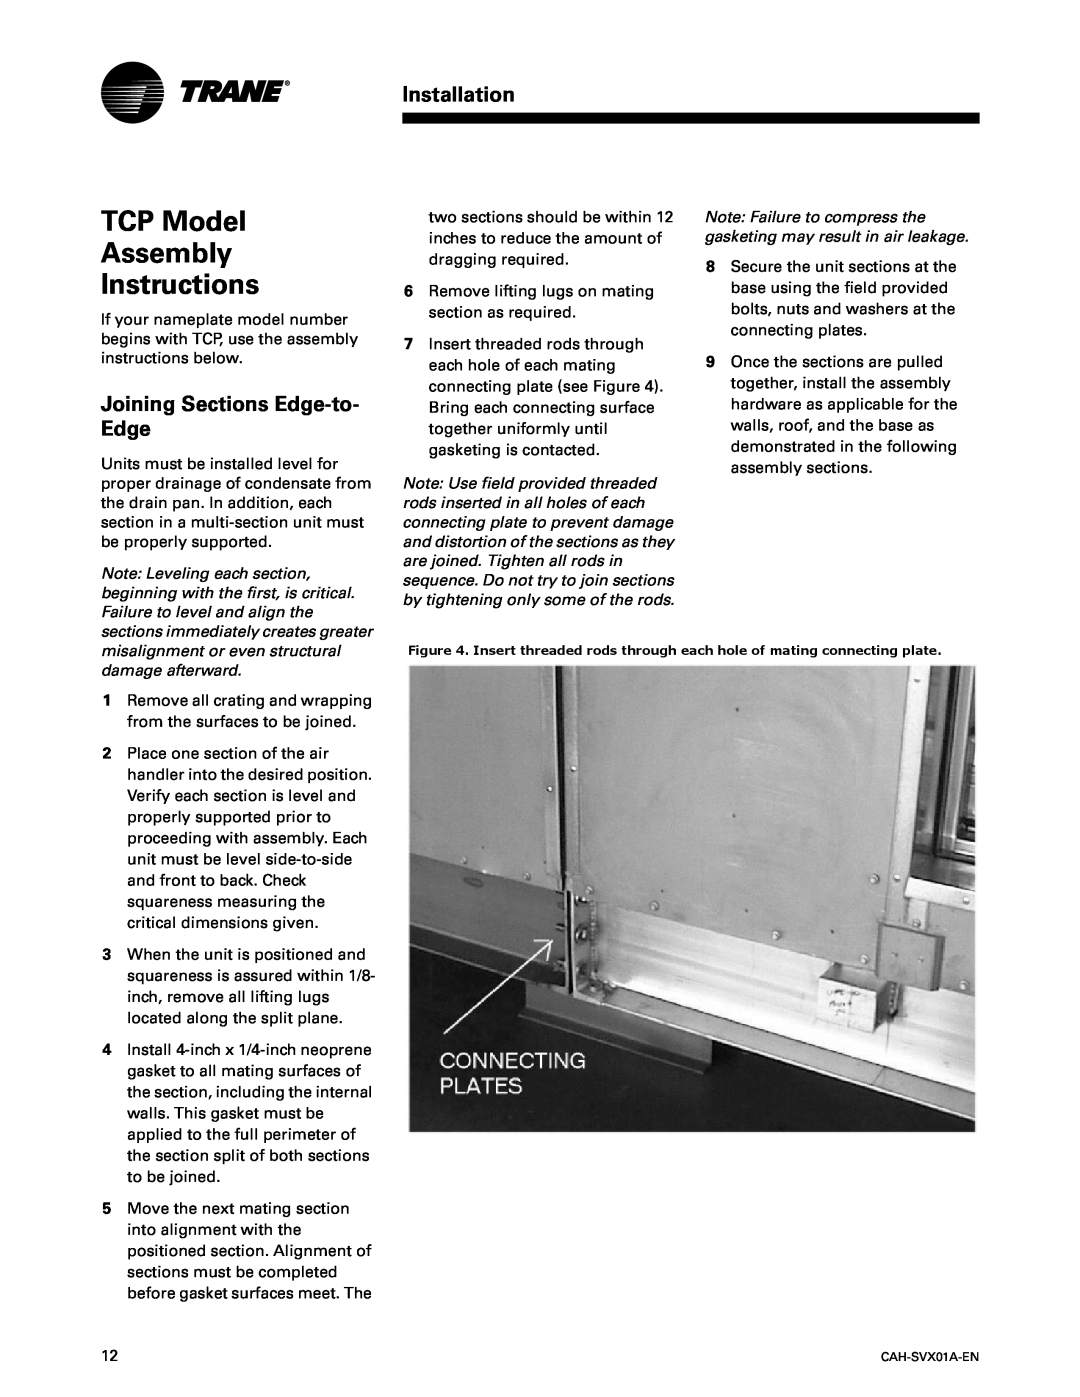 Trane CAH-SVX01A-EN manual TCP Model Assembly Instructions, Joining Sections Edge-to-Edge, Installation 